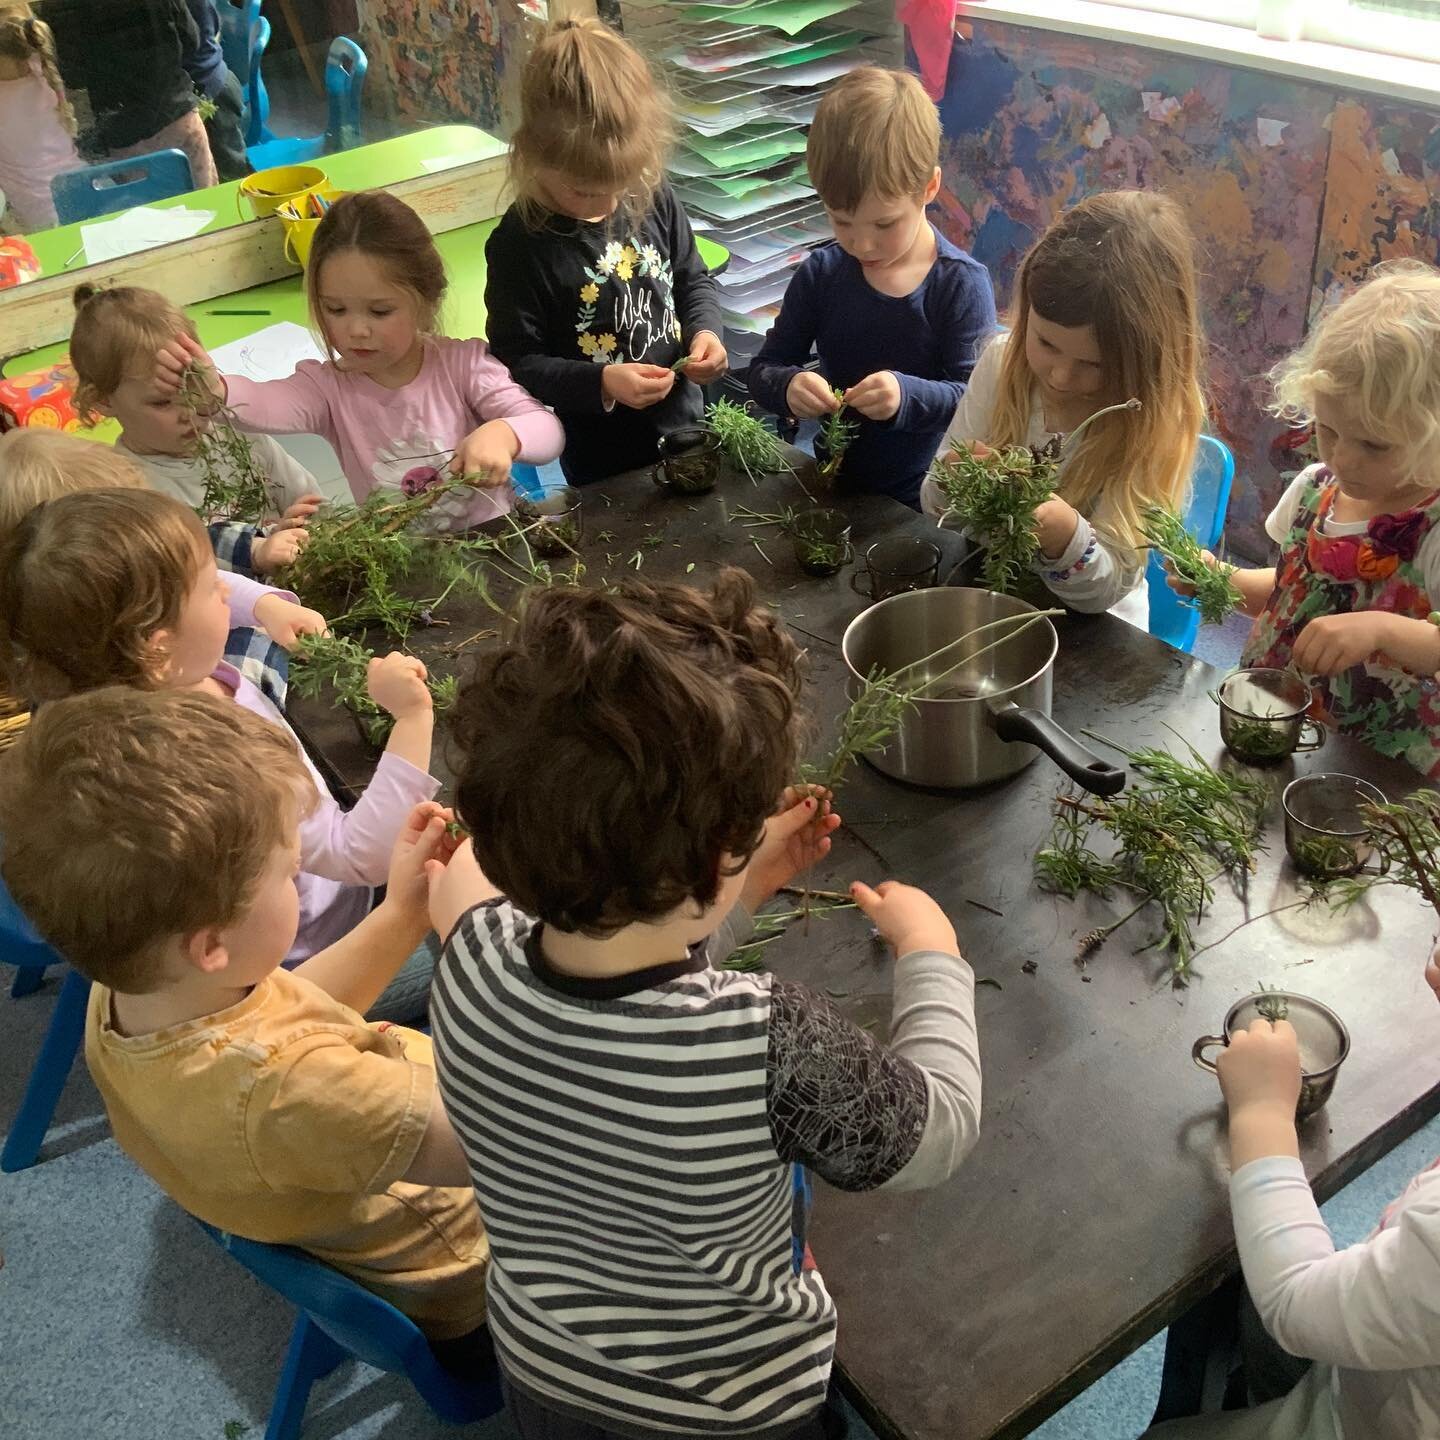 Play dough adventure experiment! We finally finished our rosemary oil so this time we tried making lavender oil. The children helped pick the leaves and flowers of the branches. We slow cooked it with grape seed oil.
Today we made play dough with our